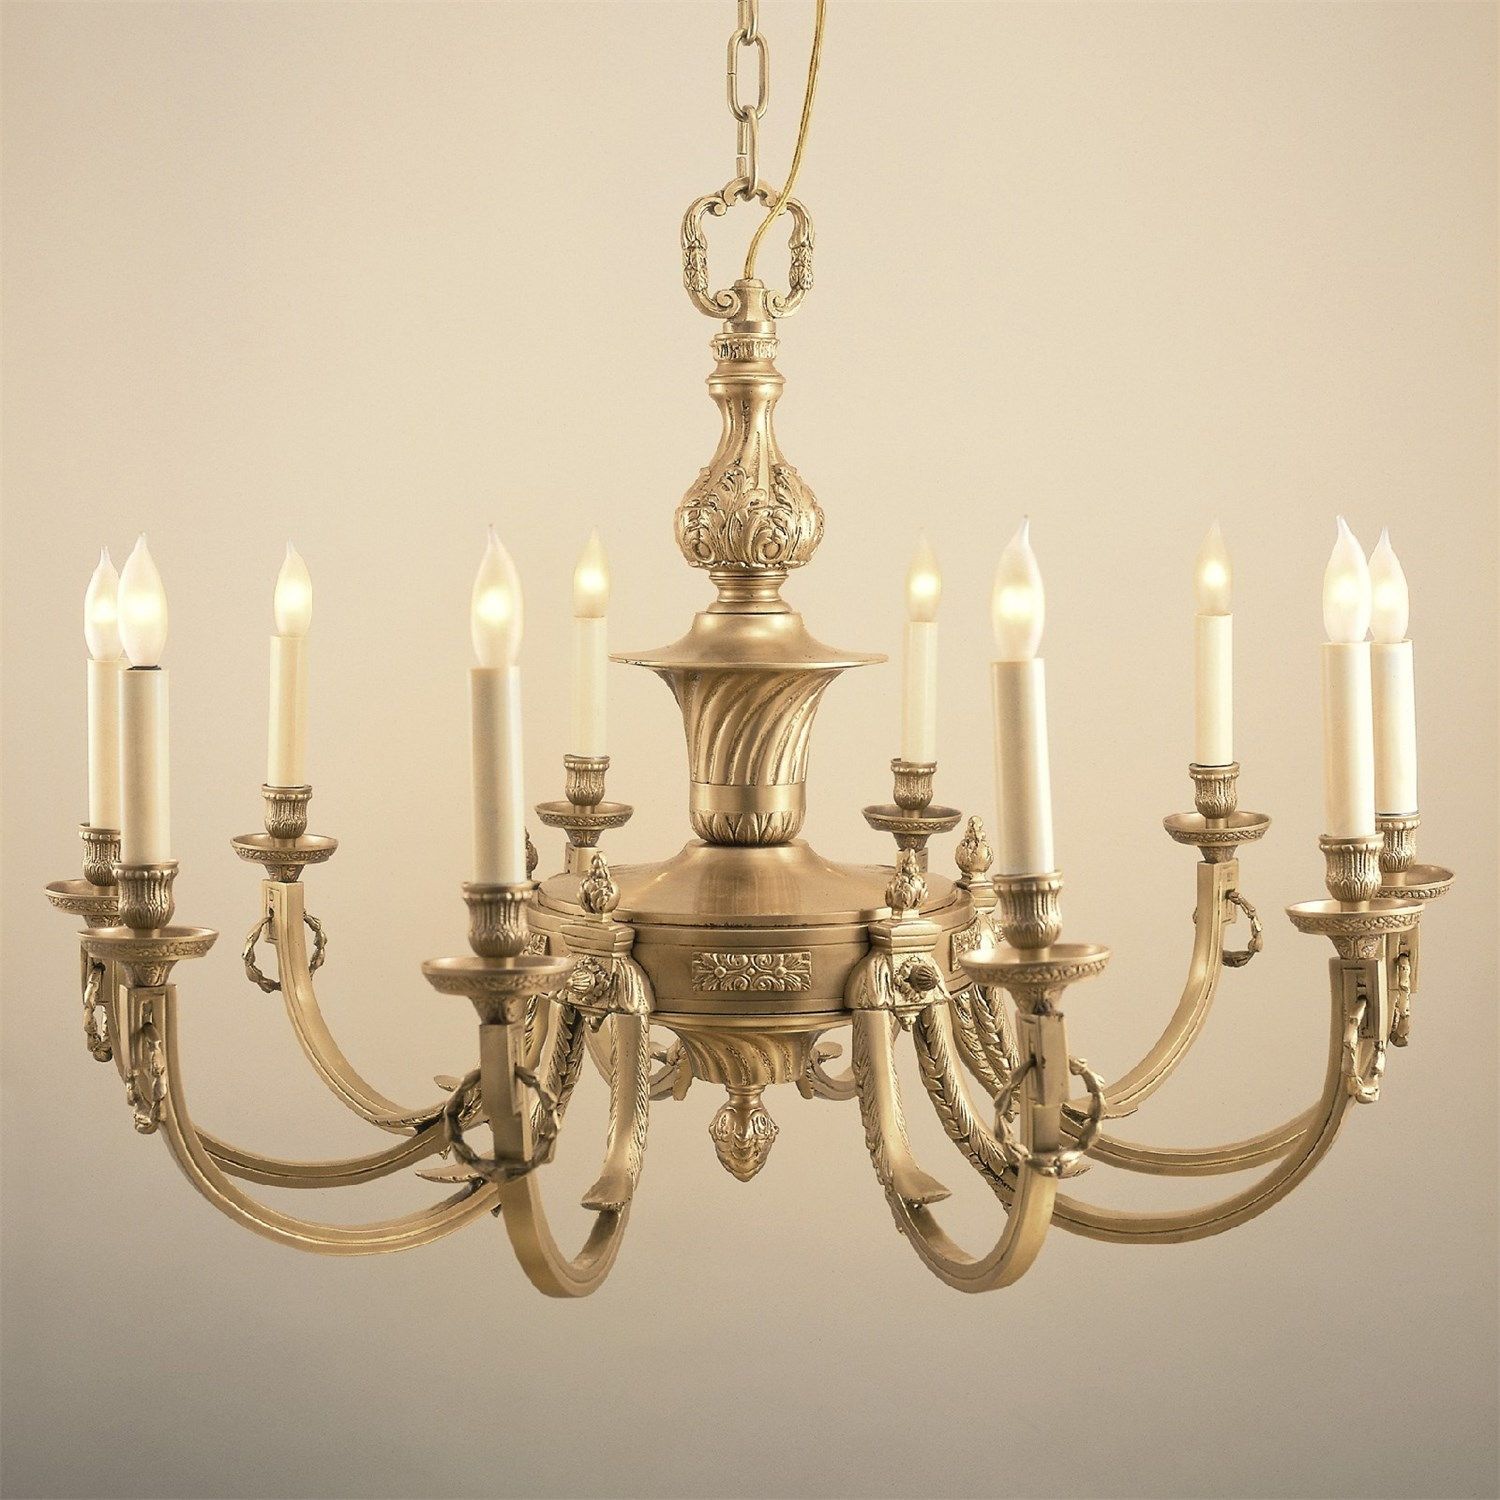 Antique Brass And Crystal Chandelier For Dining Room Beautiful Within Old Brass Chandeliers (View 24 of 25)